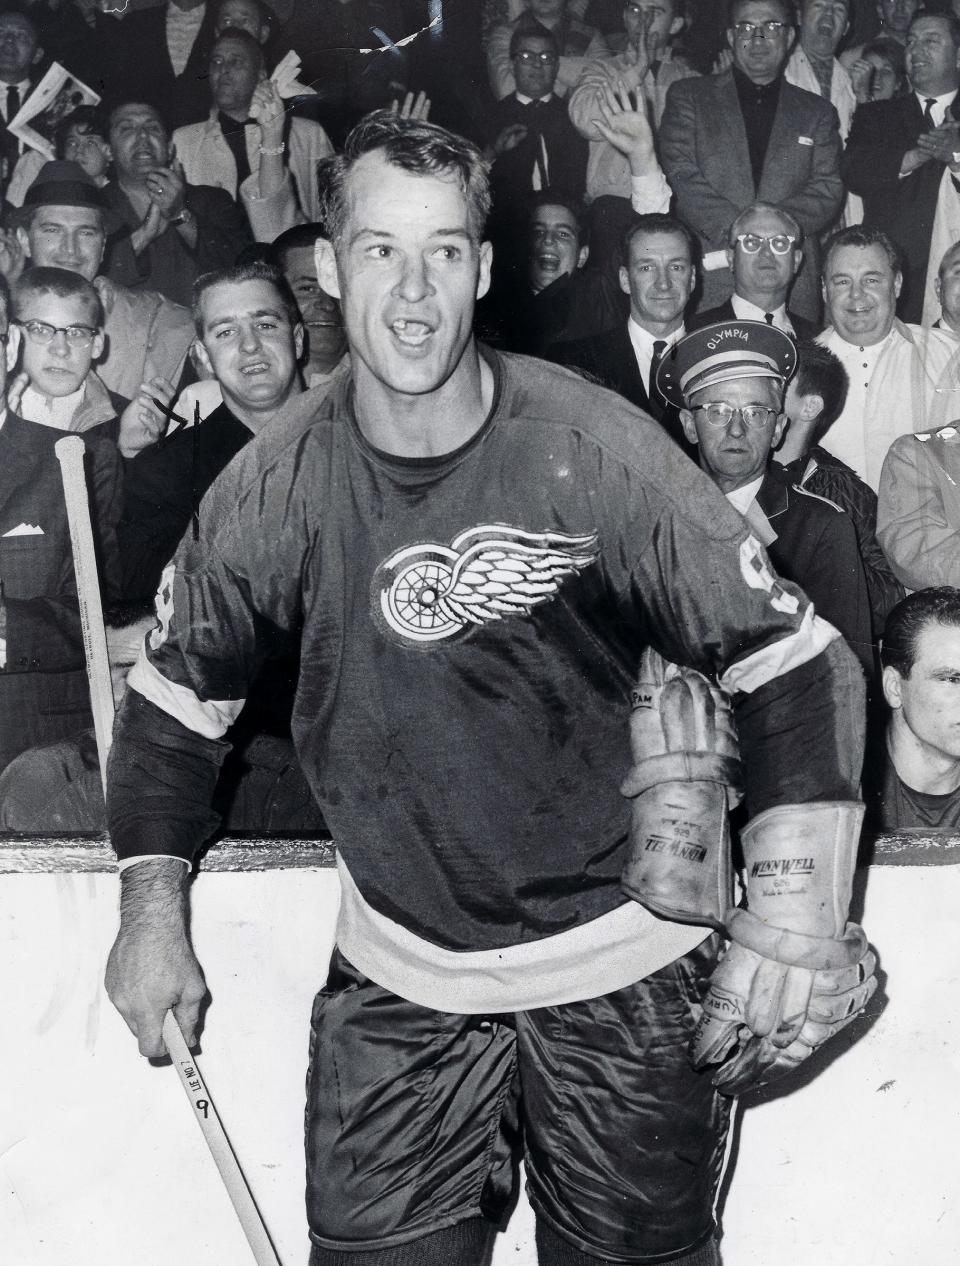 The fans cheer and chant as Gordie Howe relaxes after breaking Maurice “The Rocket” Richard’s record.